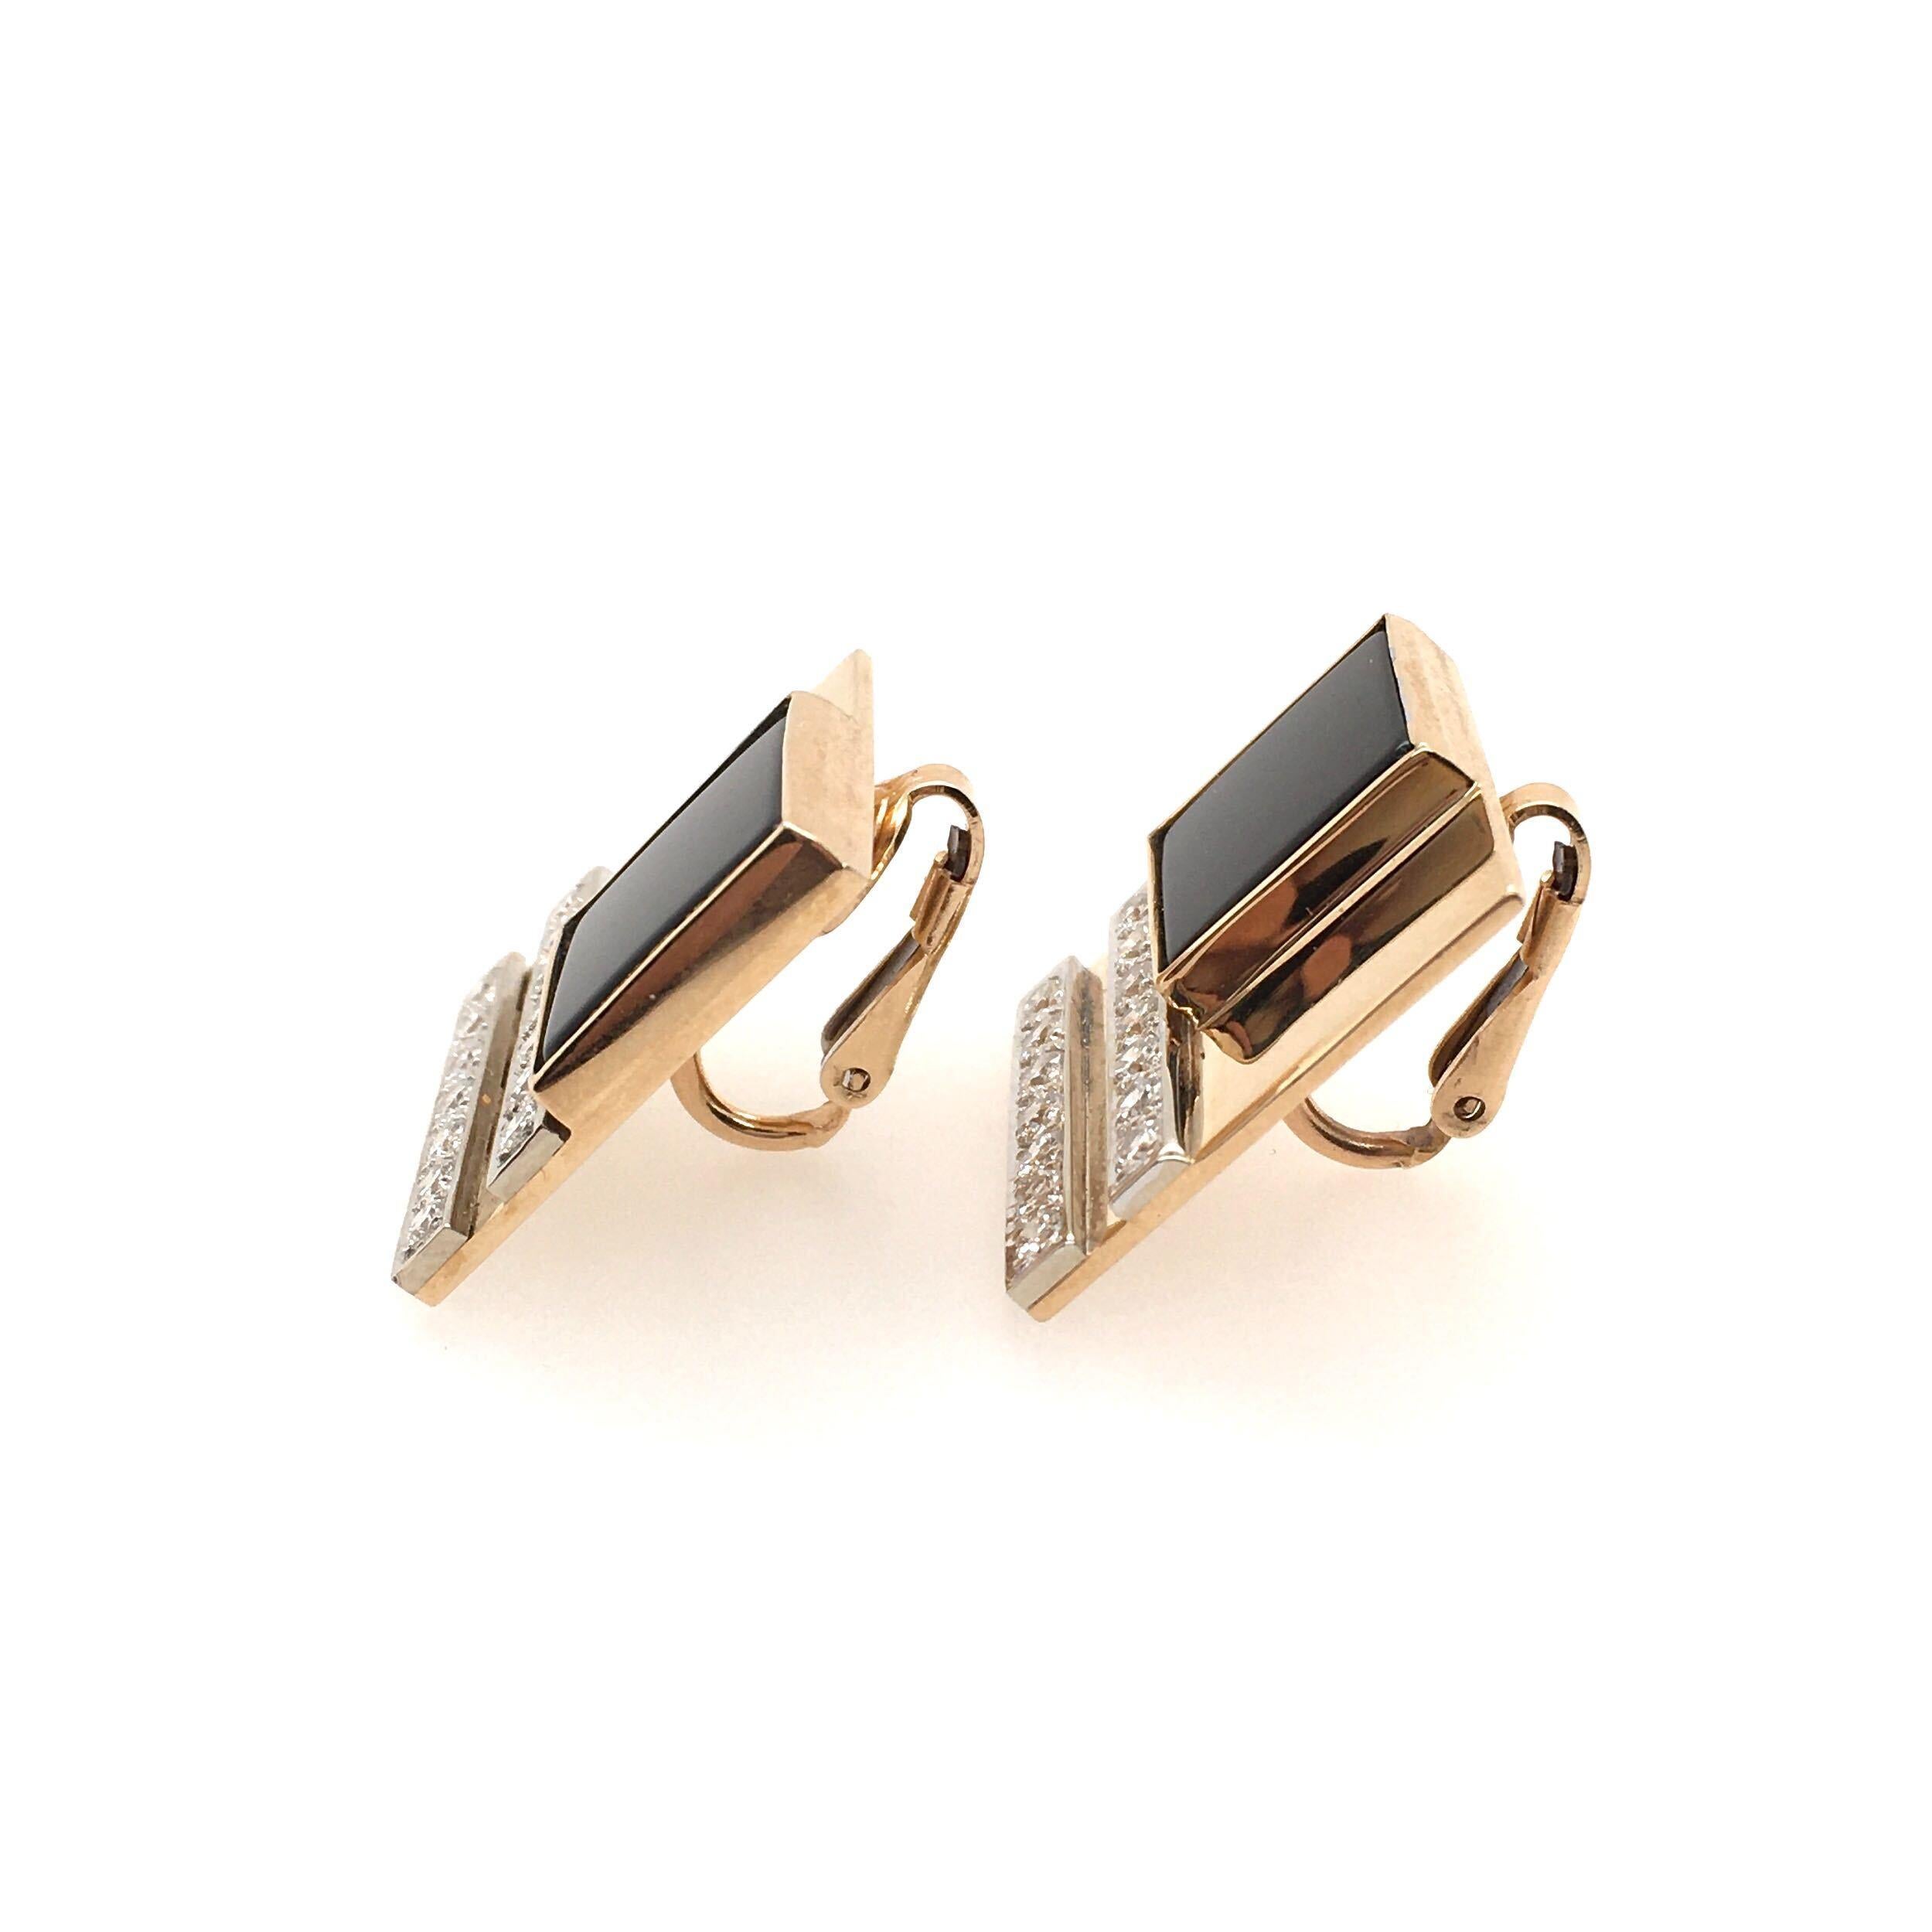 A pair of yellow gold black onyx and diamond earrings. M.J. Savitt. Of square geometric design, set with black onyx and pave diamond lines. Length is approximately 7/8 inches, gross weight is approximately 17.0 grams